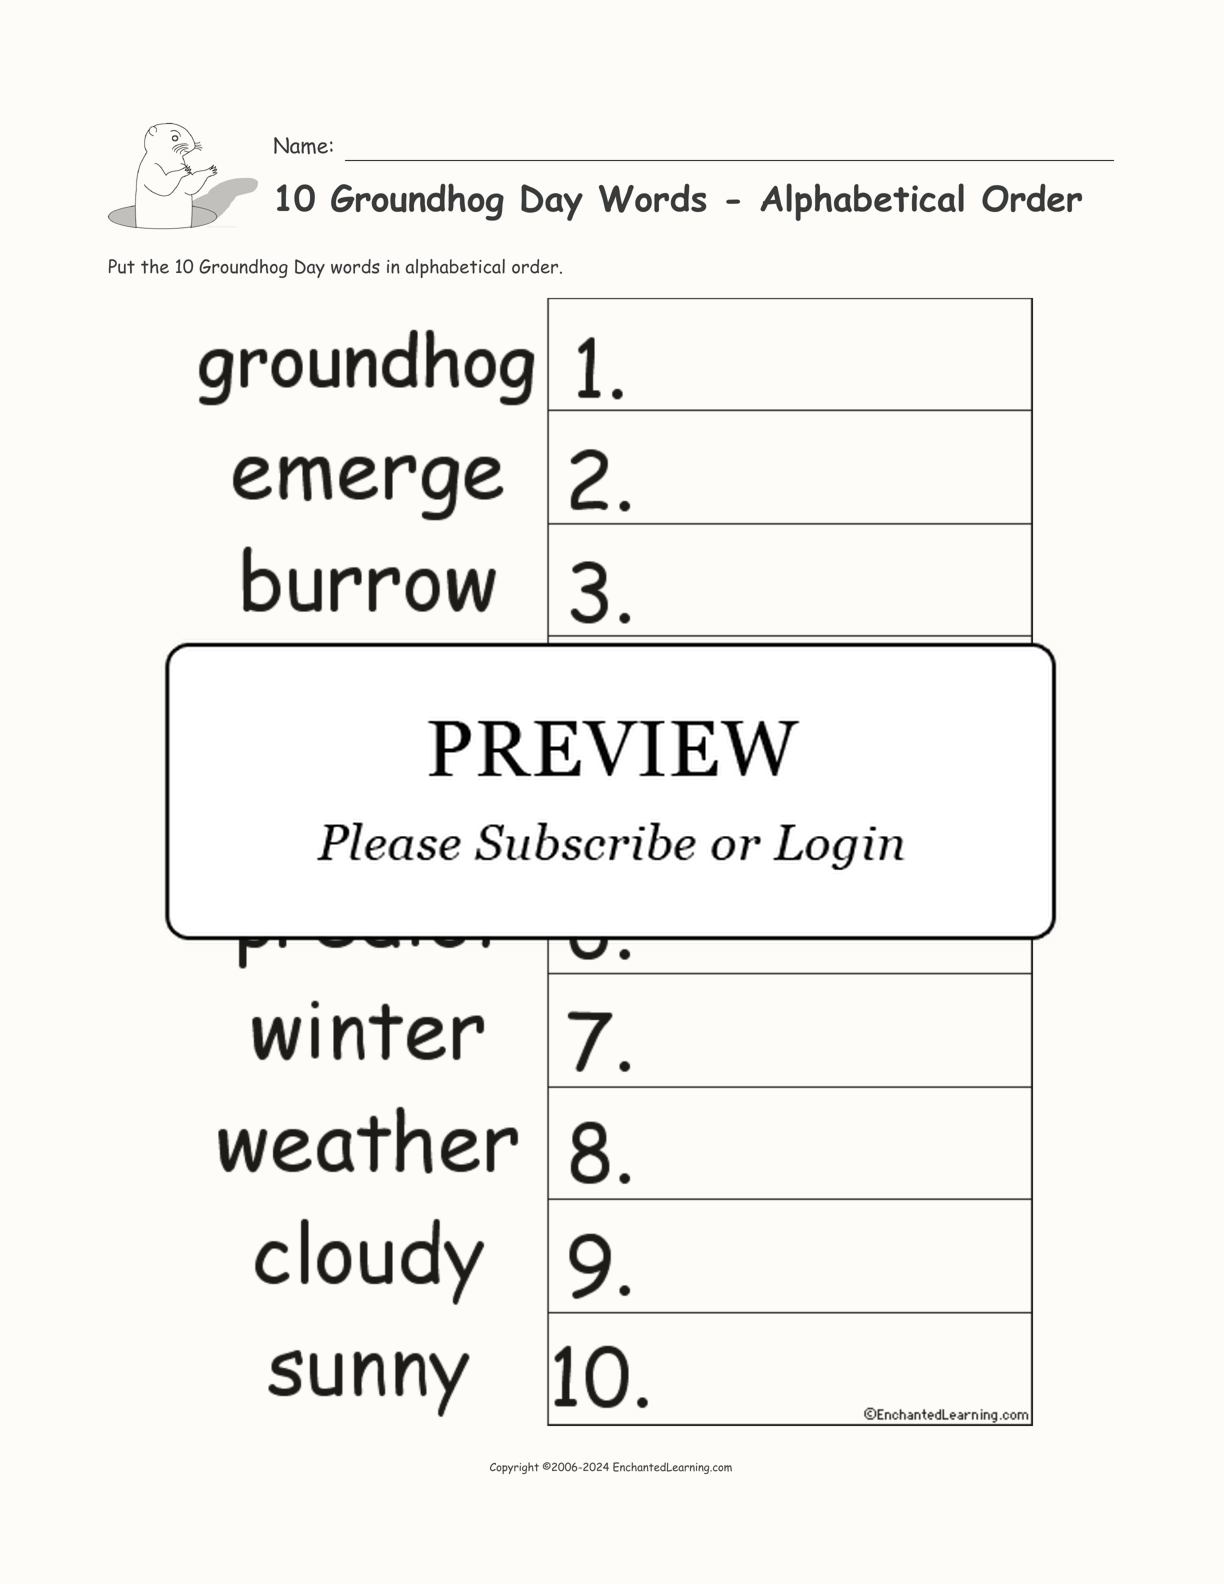 10 Groundhog Day Words - Alphabetical Order interactive worksheet page 1